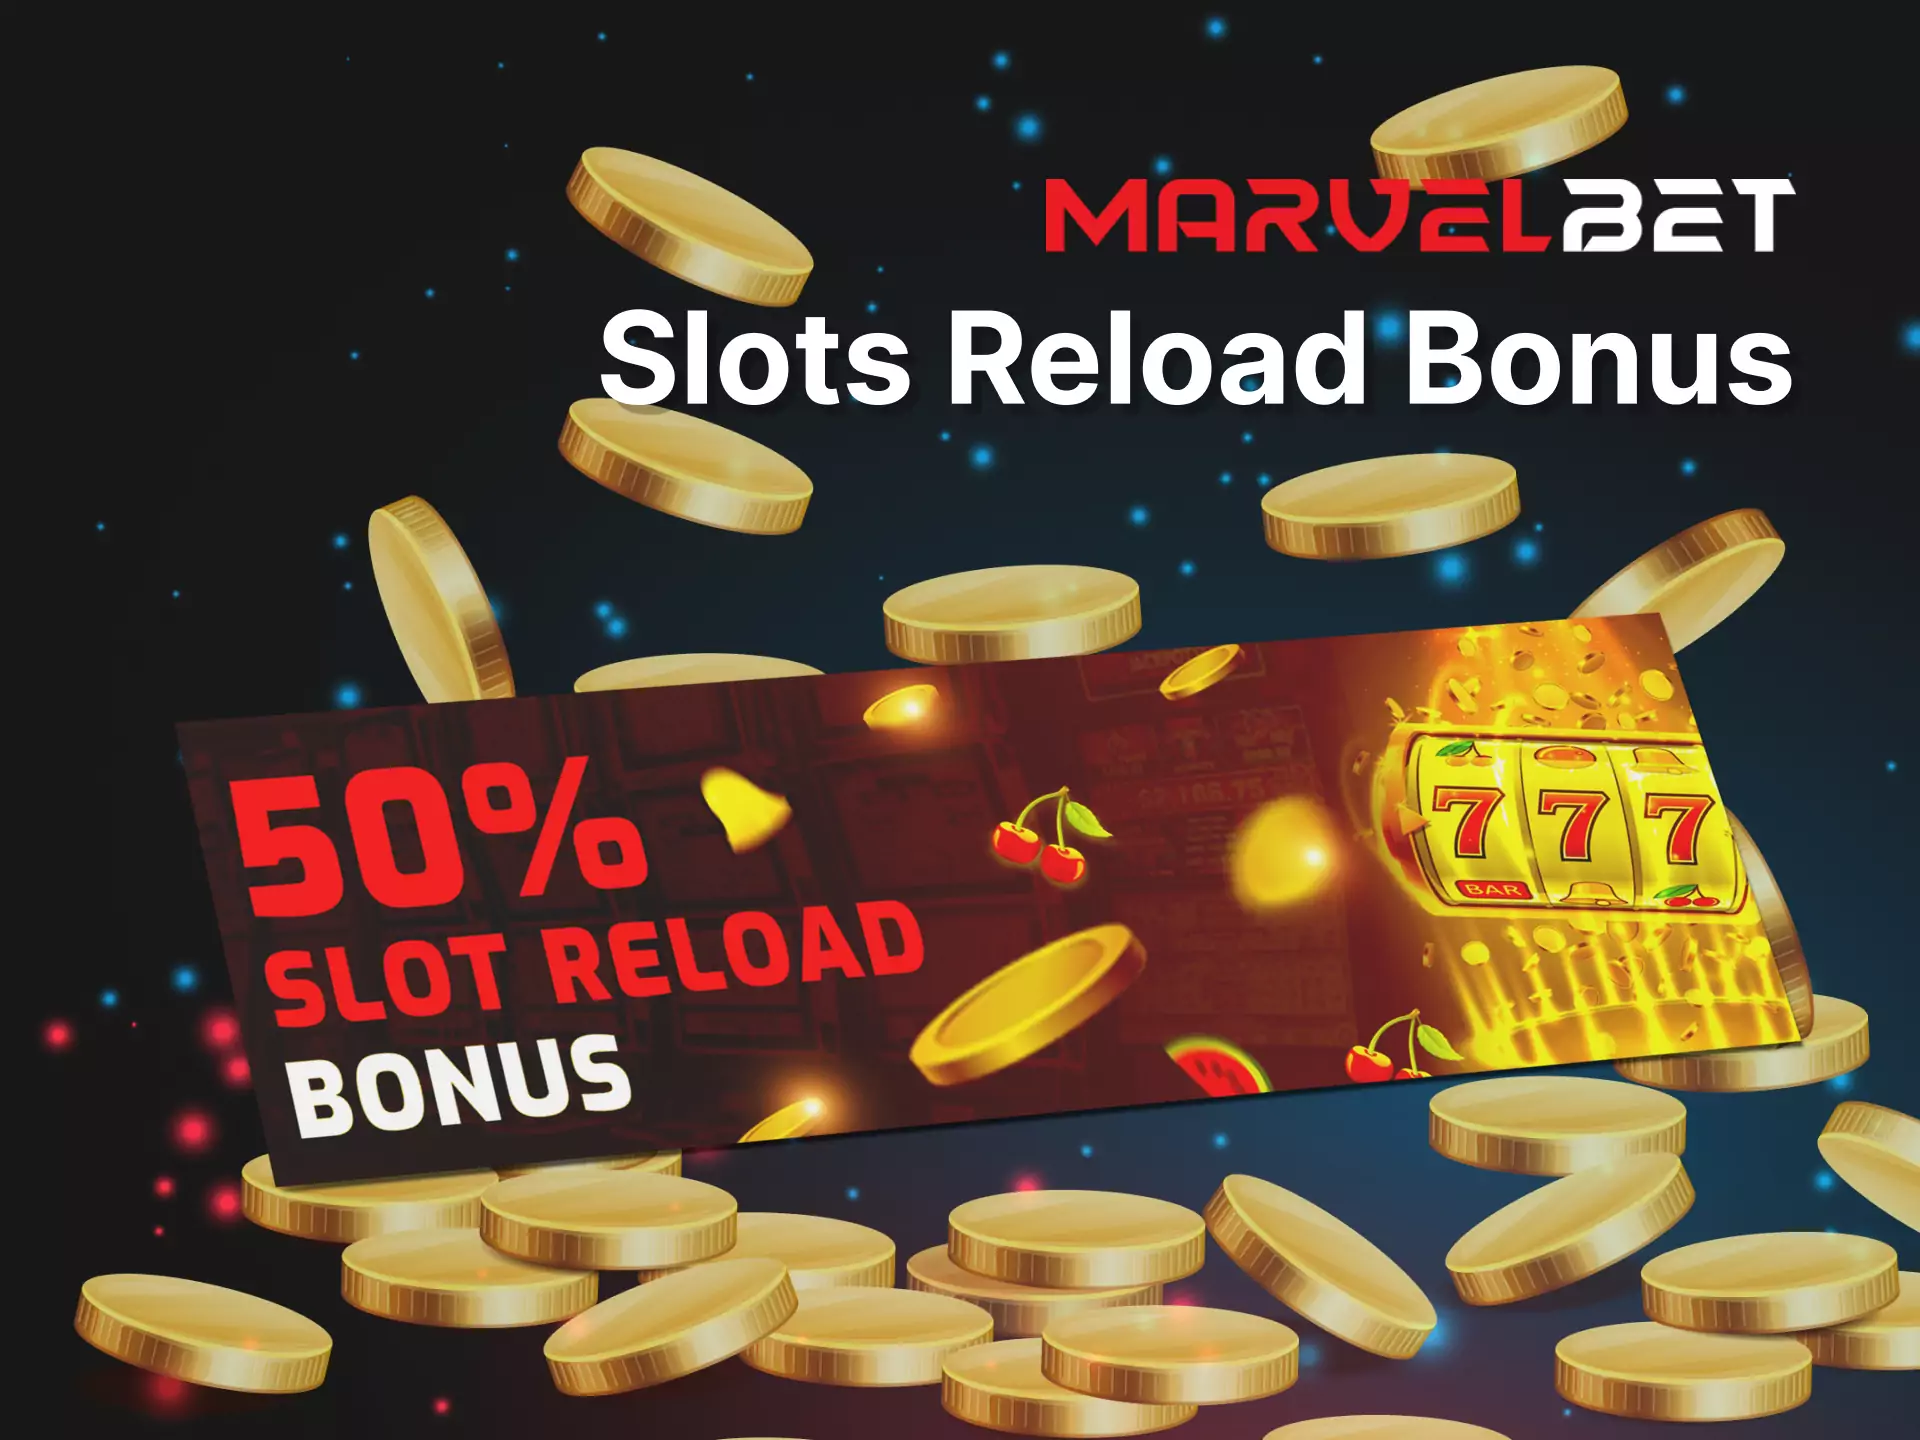 There is a bonus on playing slots at Marvelbet.